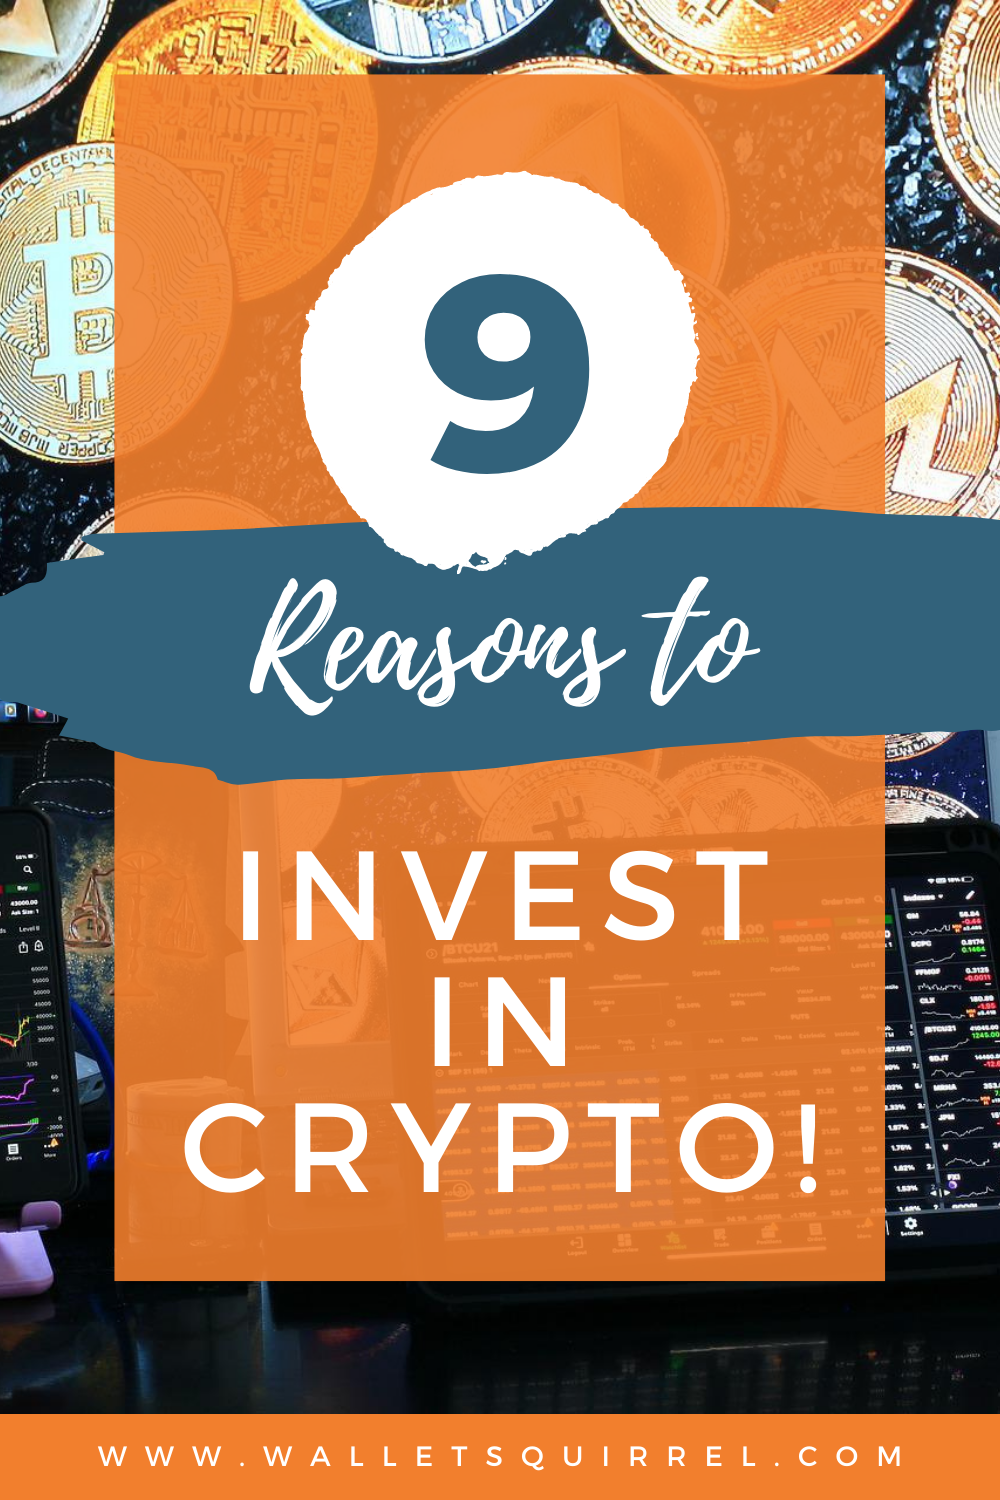 Cryptocurrency the urge to invest in crypto has grown in popularity over the last several years. However, a fair proportion of the general public still wonders why it is causing such a stir. Among so many questions, one that particularly stands out is “Is investing in cryptocurrencies worth it?” The answer is an emphatic yes. To give you a better idea, we are narrowing down the reasons why you should invest in crypto: